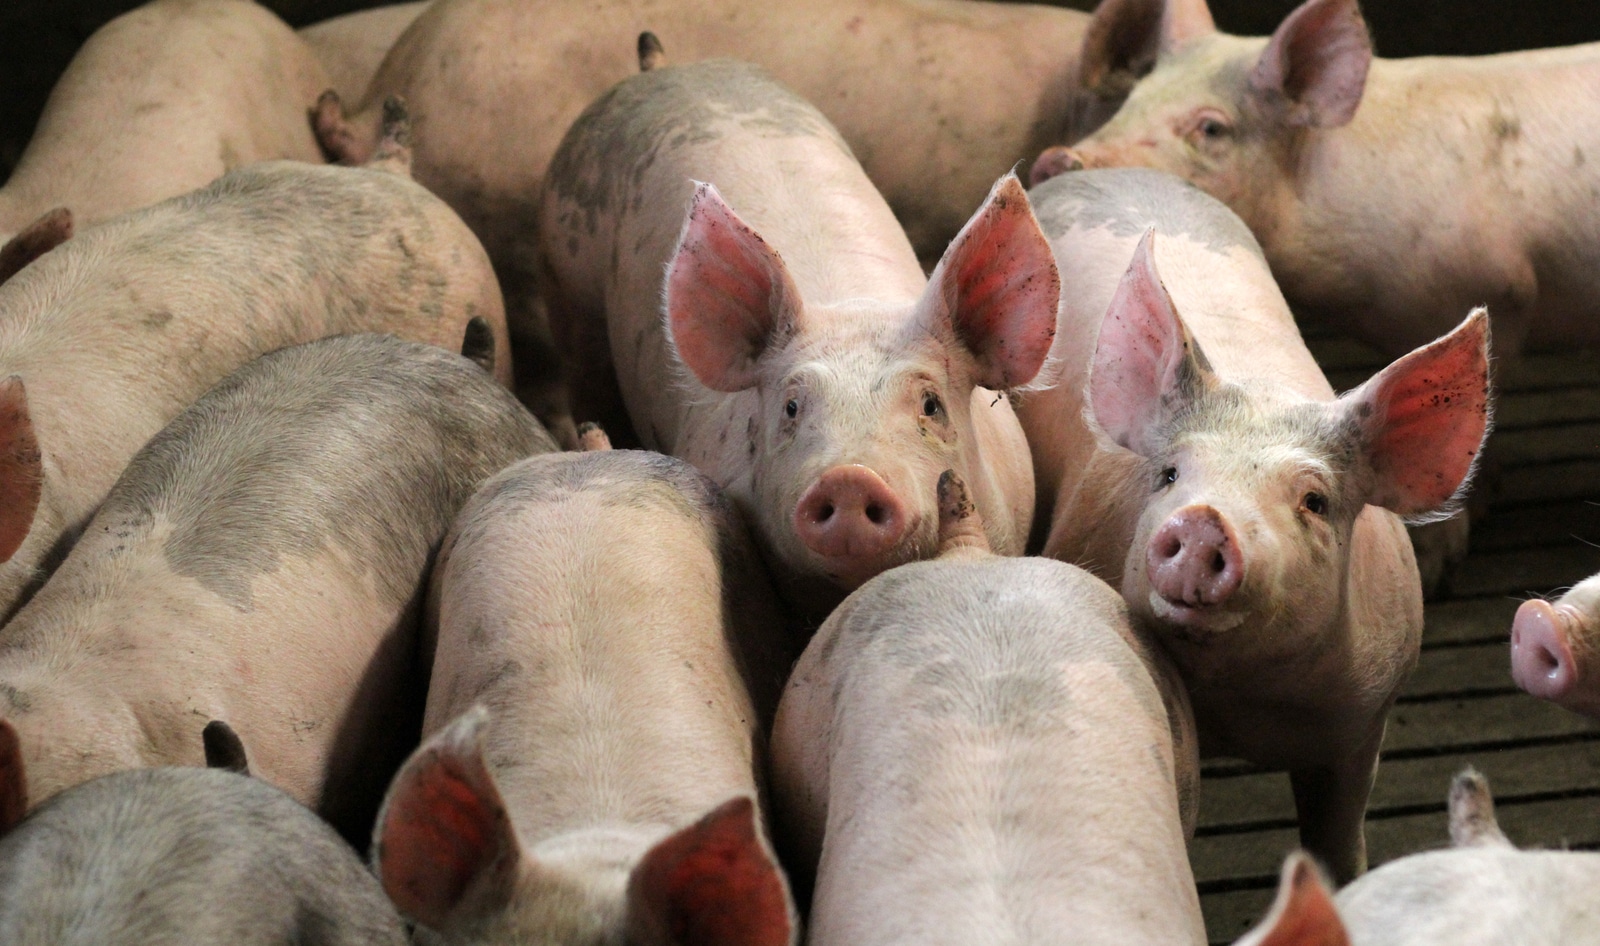 1 Million People a Year Die From Antibiotic Resistance. The Culprit? Factory Farms.